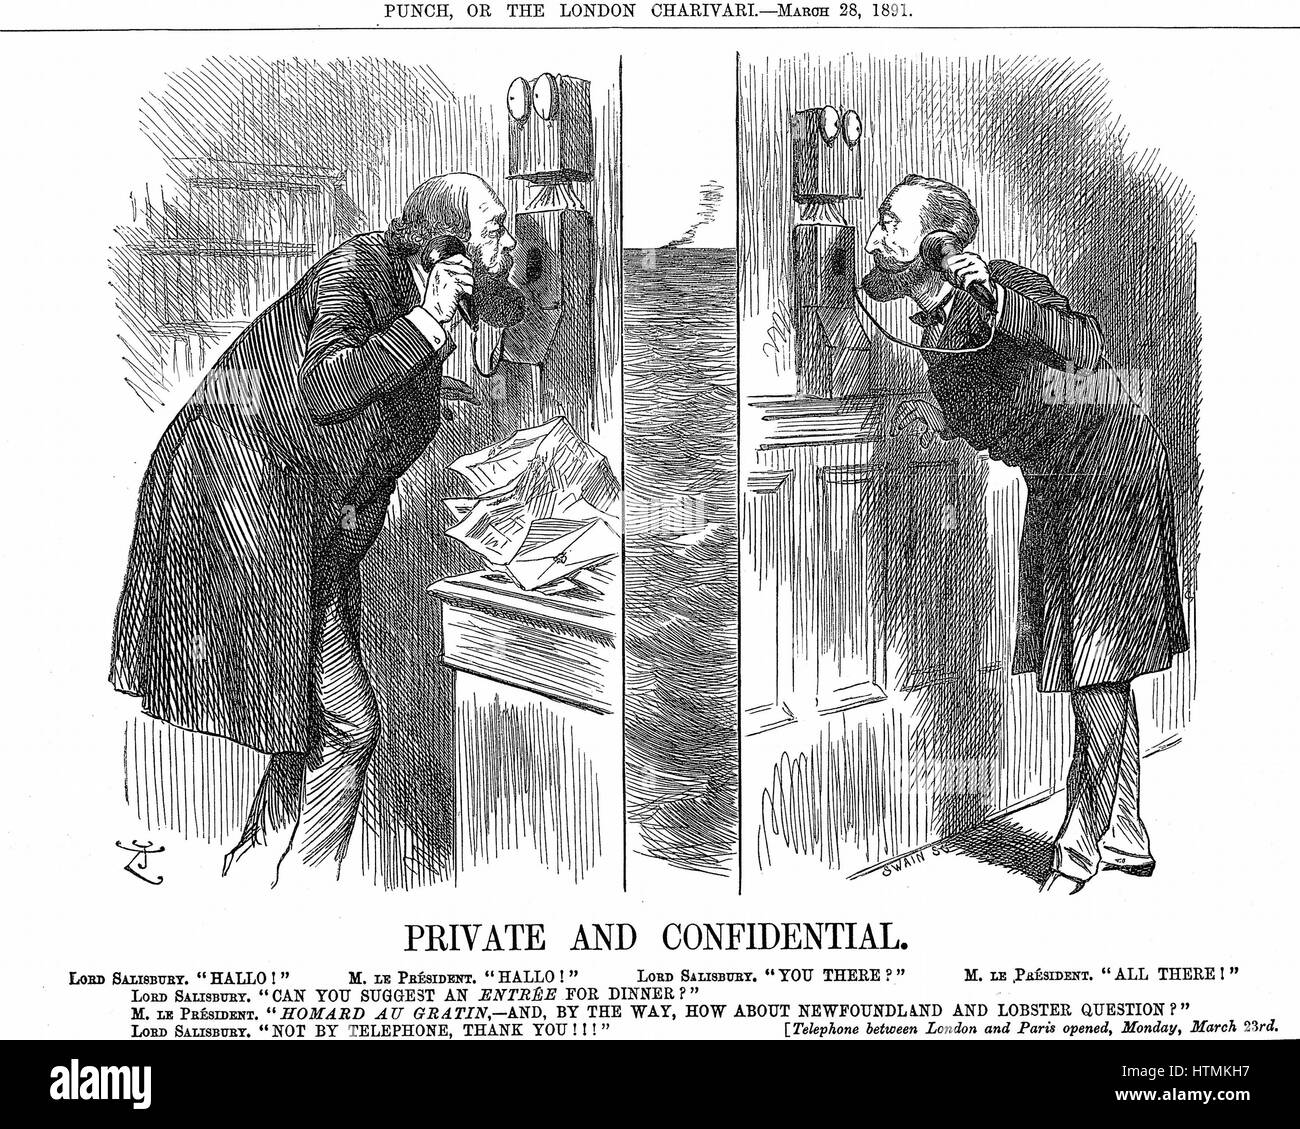 Opening of the Anglo-French telephone line. The British Prime Minister (Lord Salisbury) in conversation with the French President (Sadi Carnot). John Tenniel cartoon London 28 March 1891. Wood engraving Stock Photo